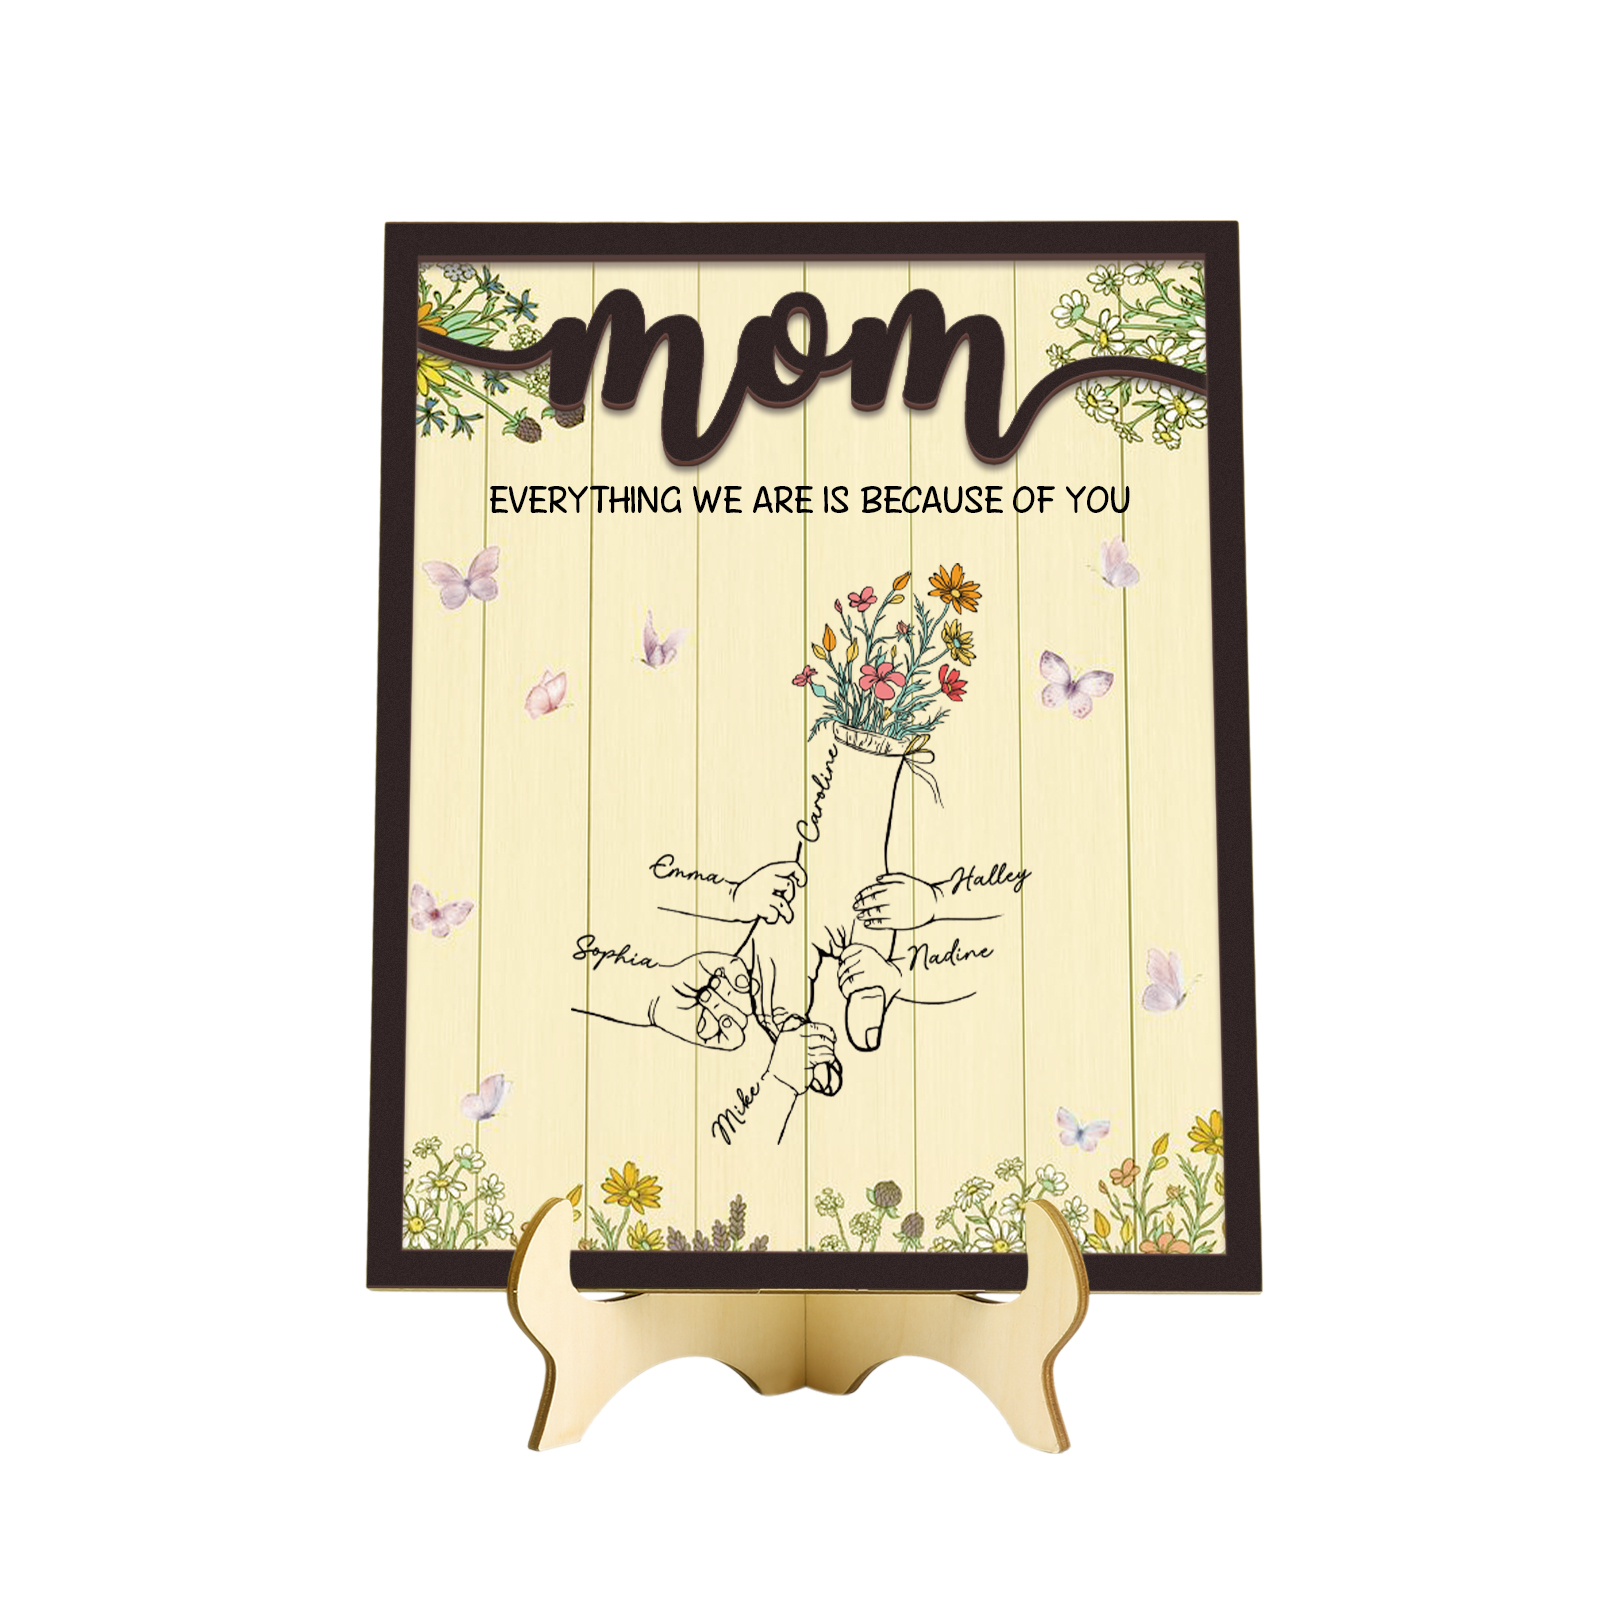 6 Names - Personalized Customizable Text Home Frame Wooden Ornament Holding Hands Flower Elements Style Ornament for Mom